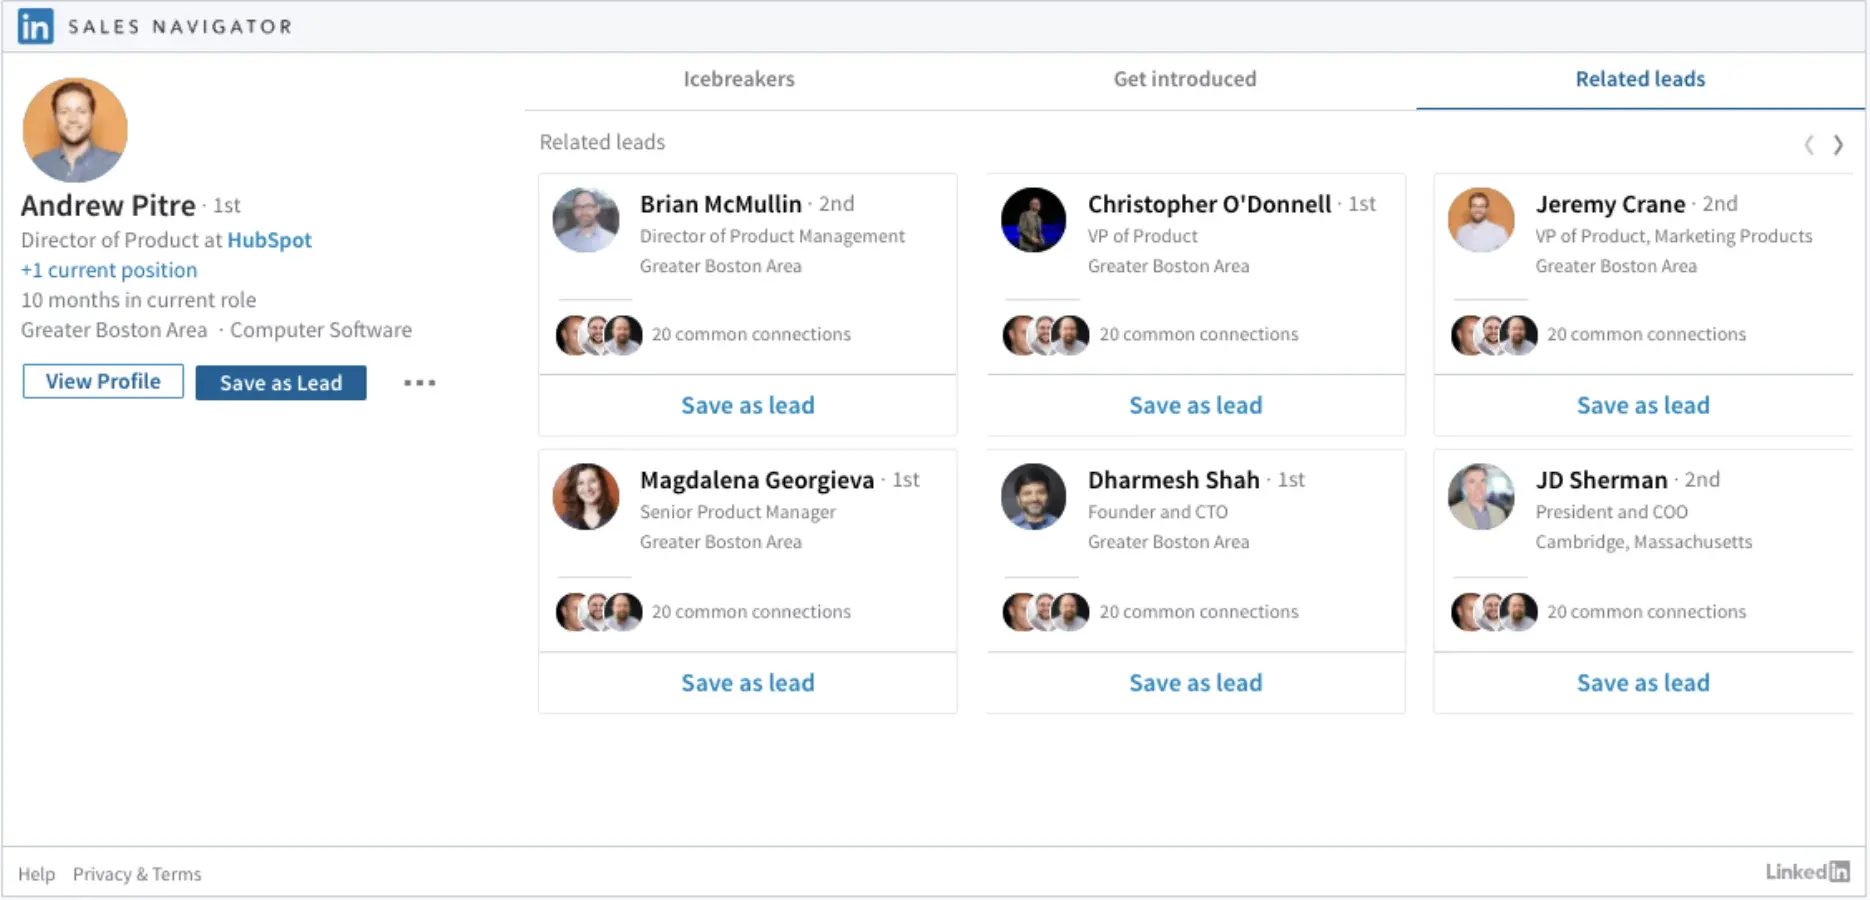 HubSpot’s CRM can integrate seamlessly with LinkedIn Sales Navigator.